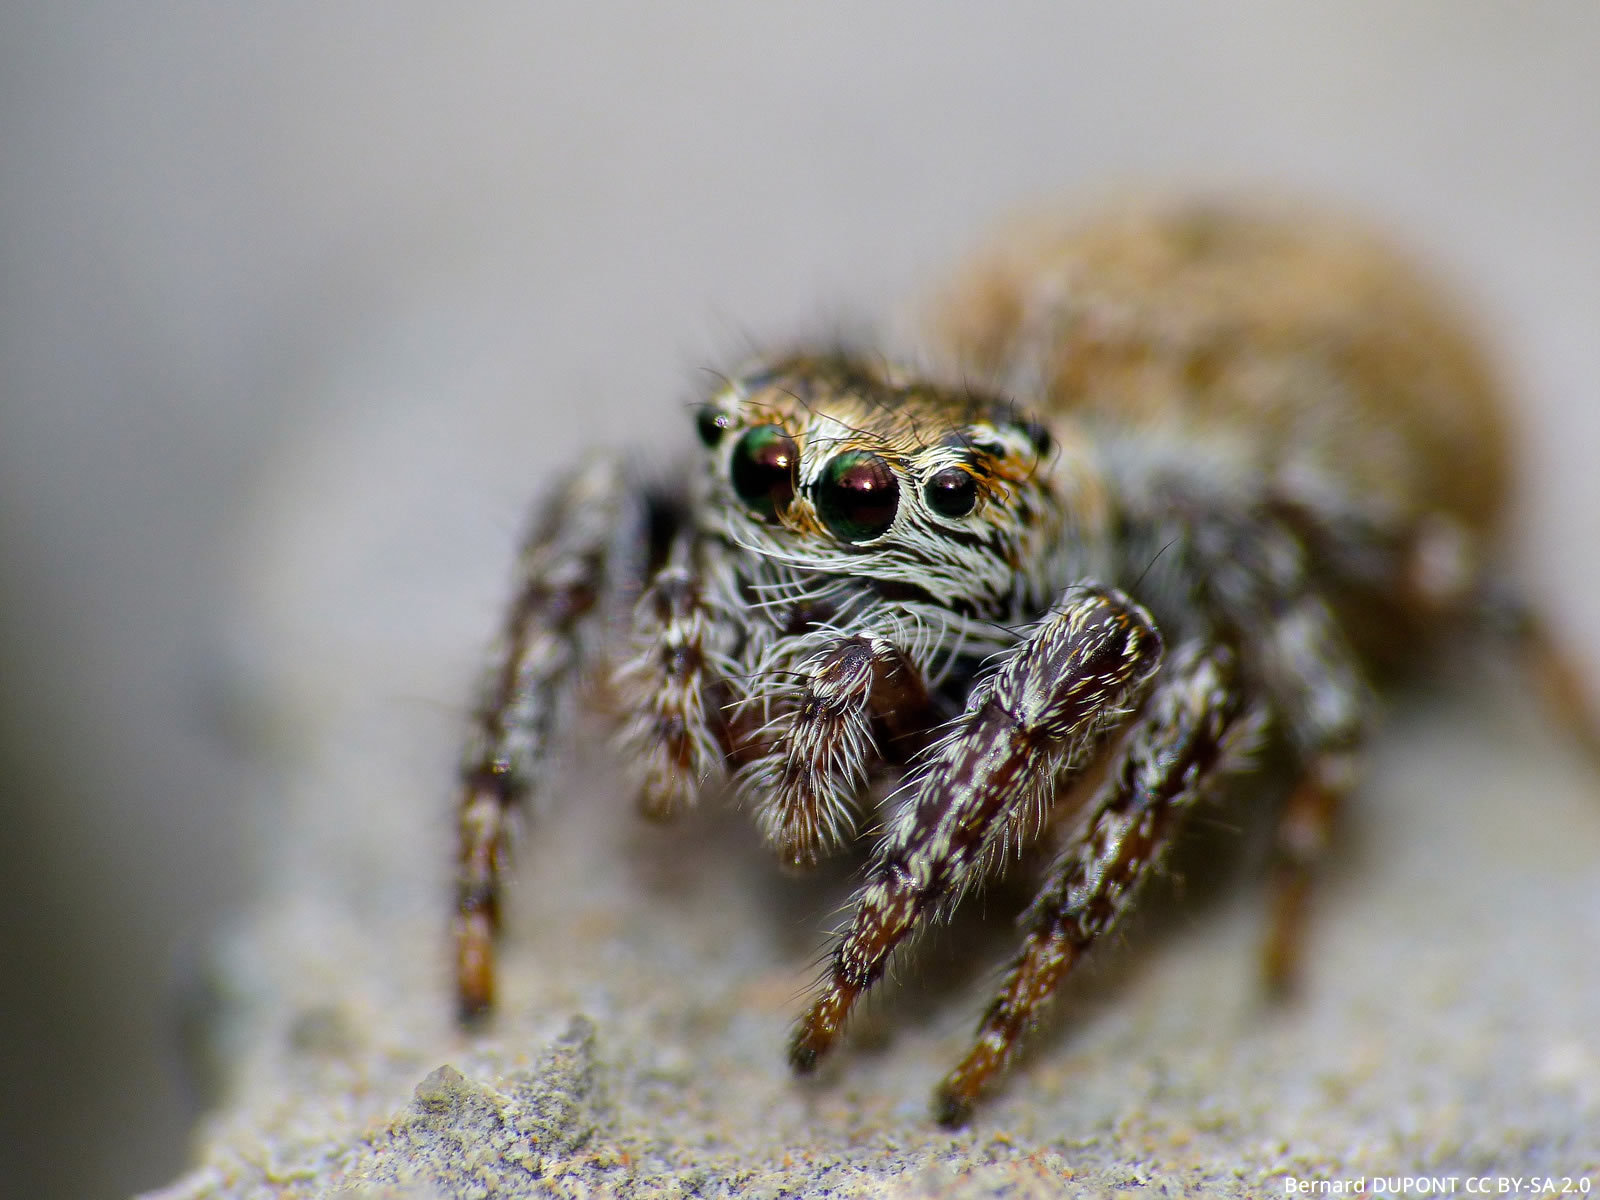 How small is a jumping spider?